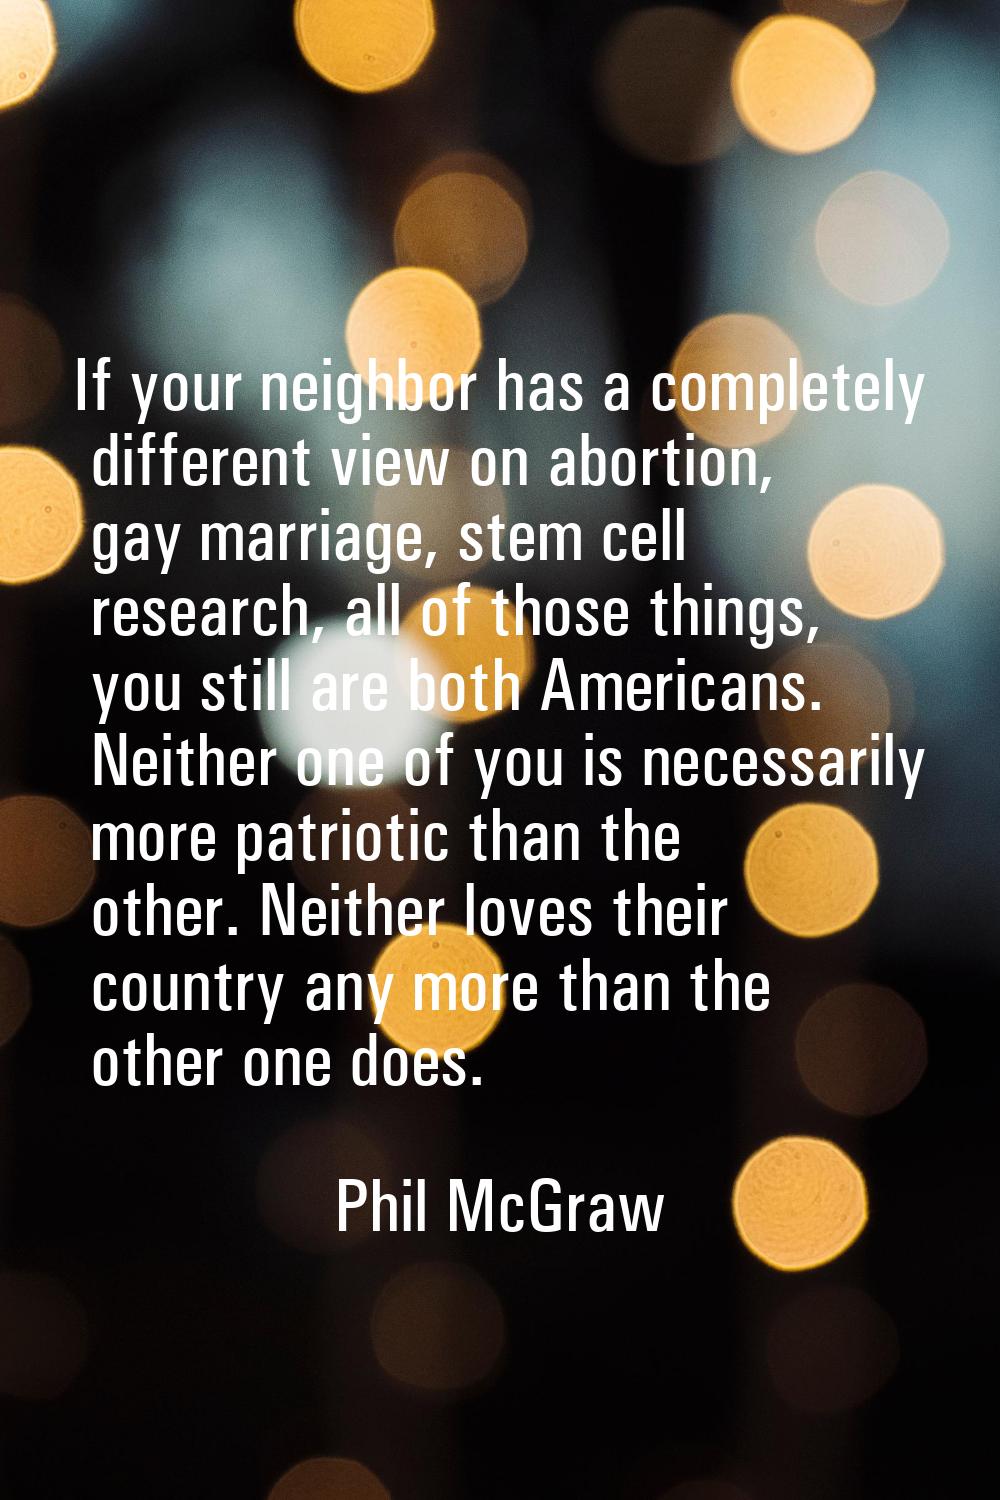 If your neighbor has a completely different view on abortion, gay marriage, stem cell research, all